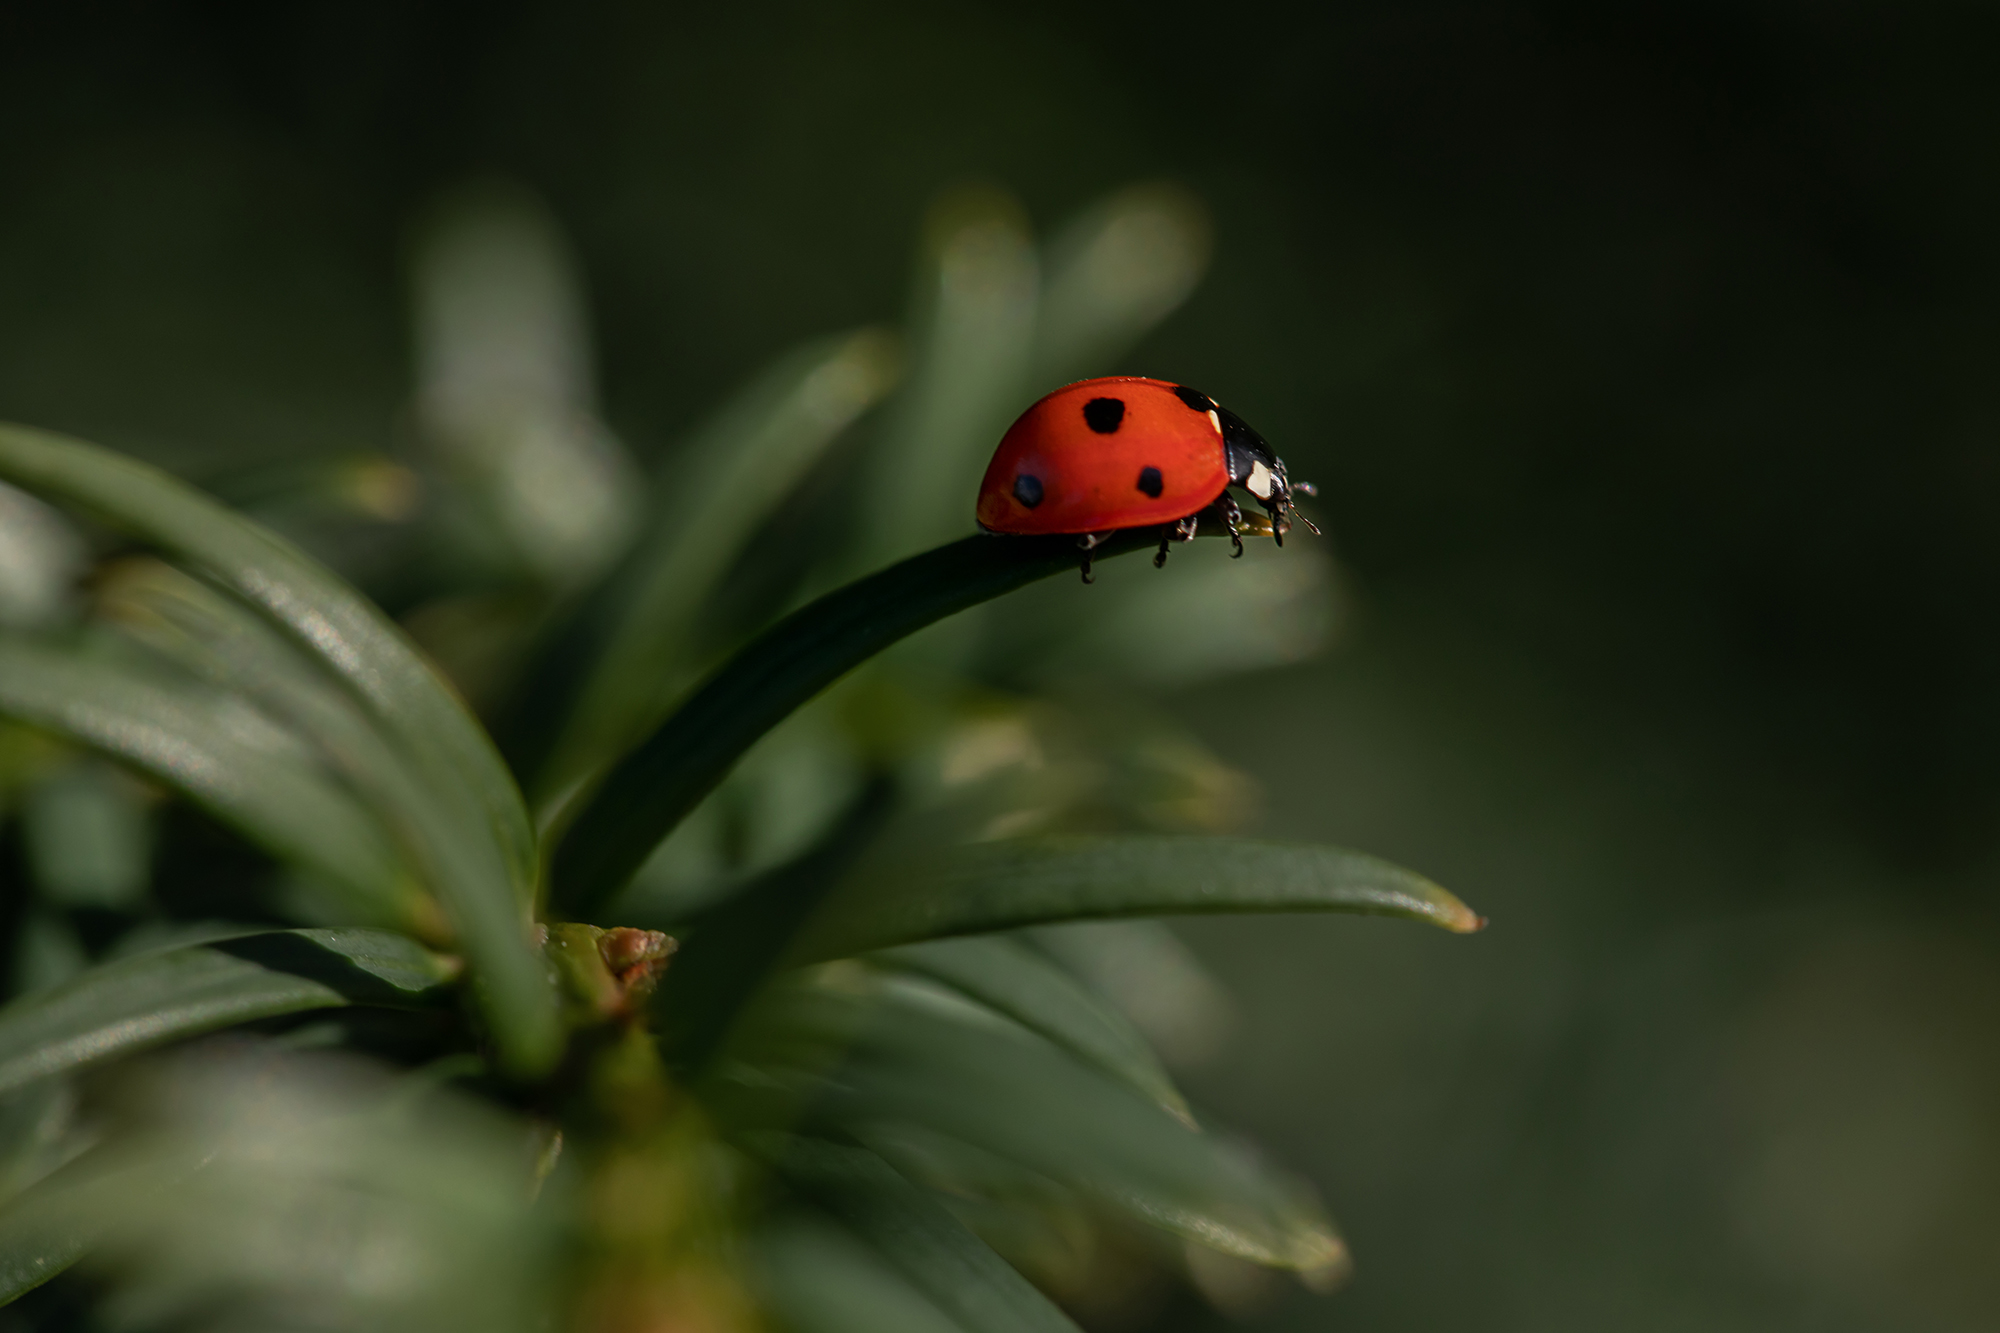 a red ladybug on a green leaf demonstrating color theory